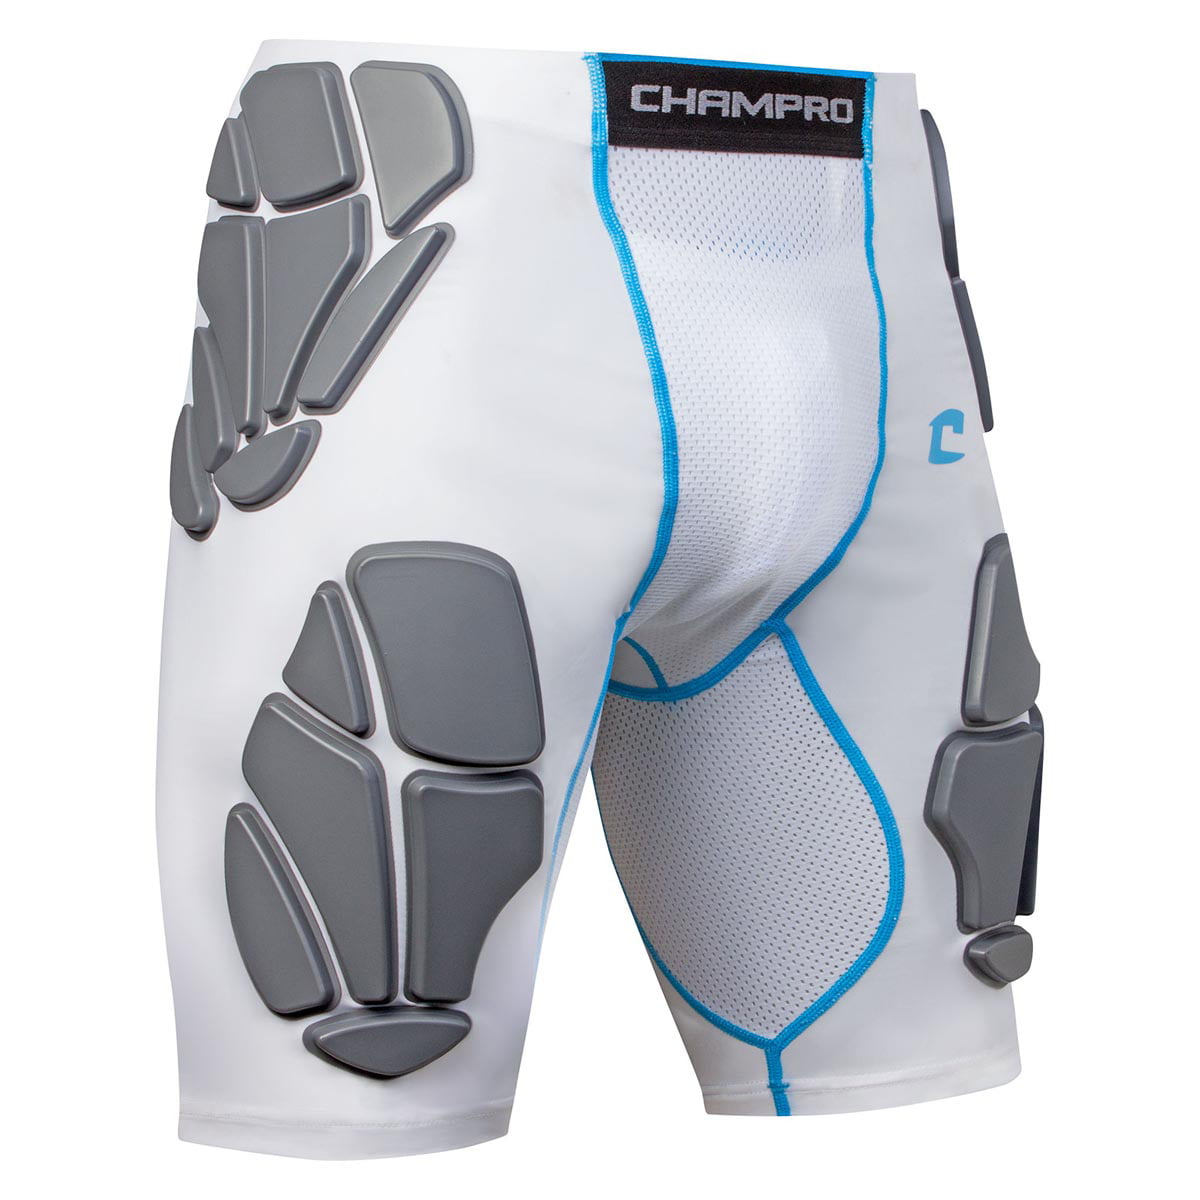 CHAMPRO FPGU7 7 PAD youth and adult GIRDLE FOOTBALL PANTS CP 